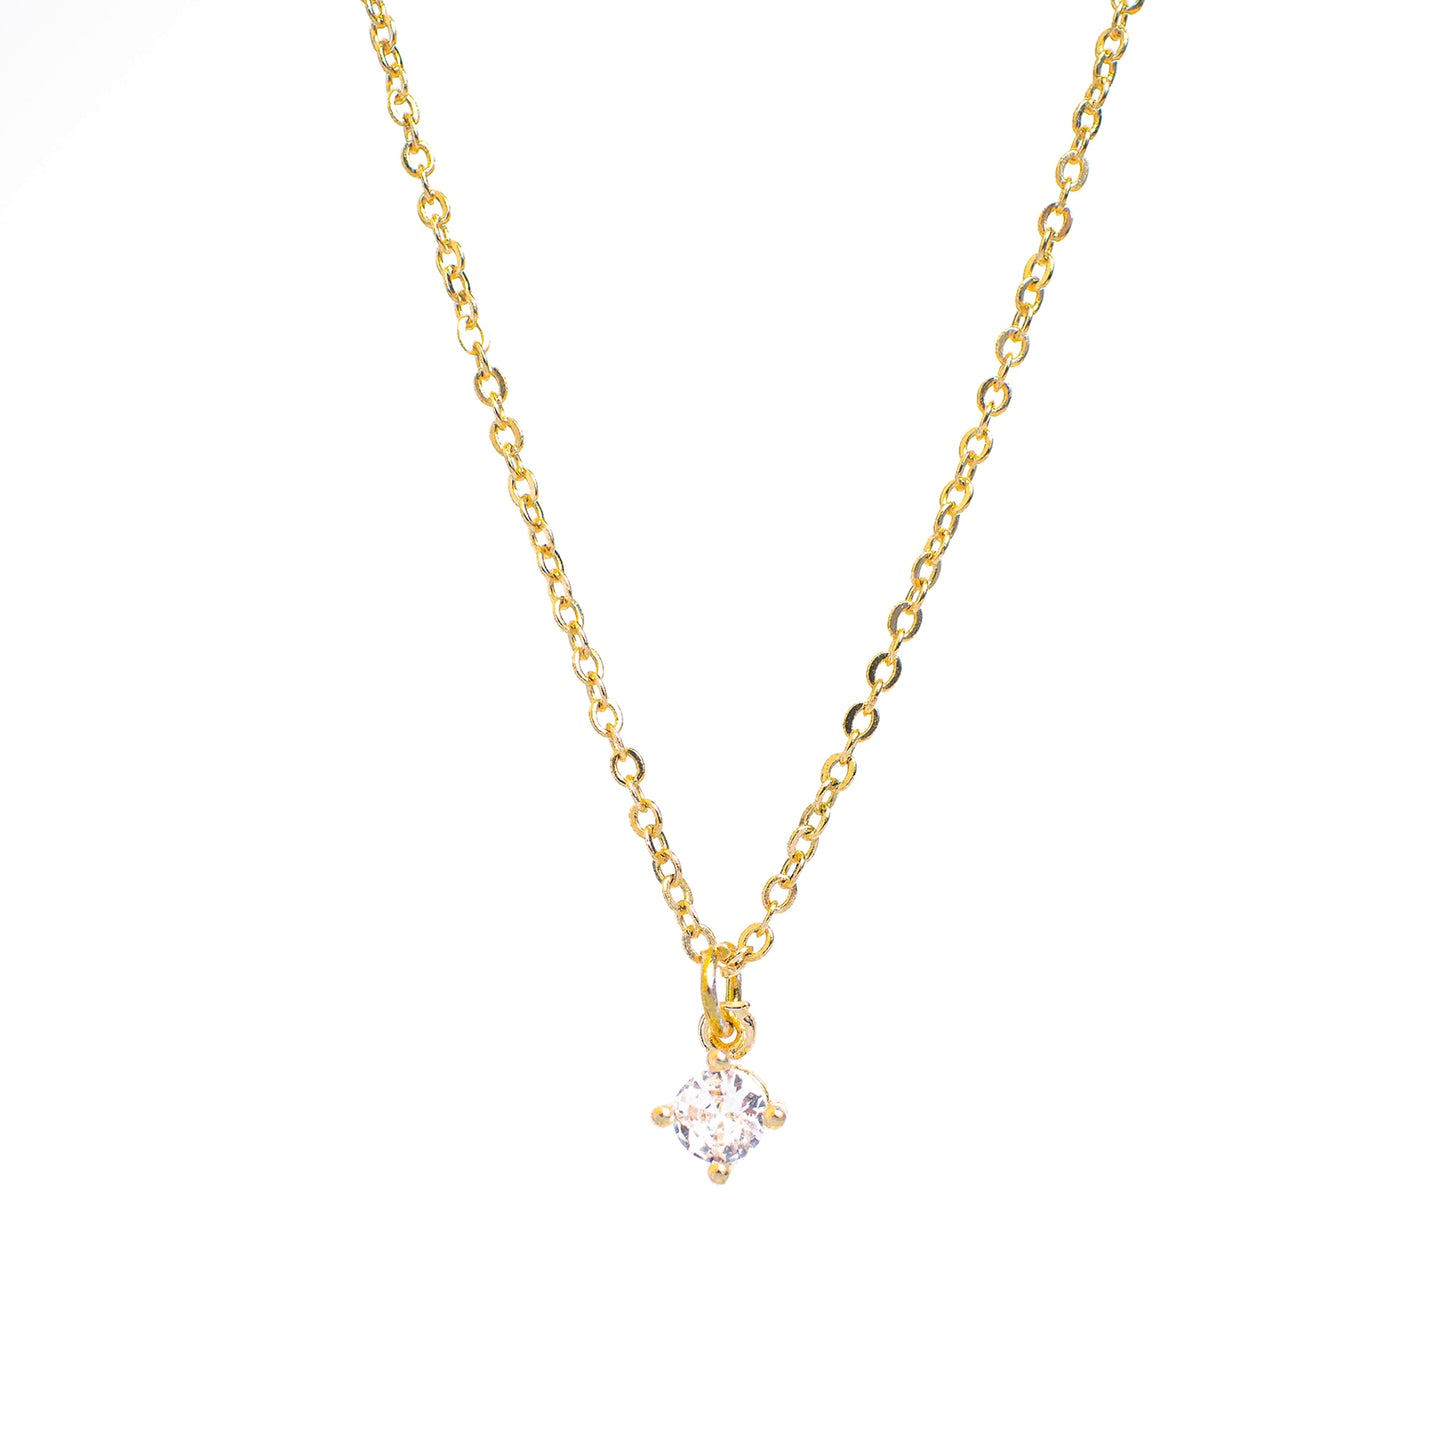 This photo features a thin chain necklace made of 14K gold-plated sterling silver, paired with Round Zircon Necklace